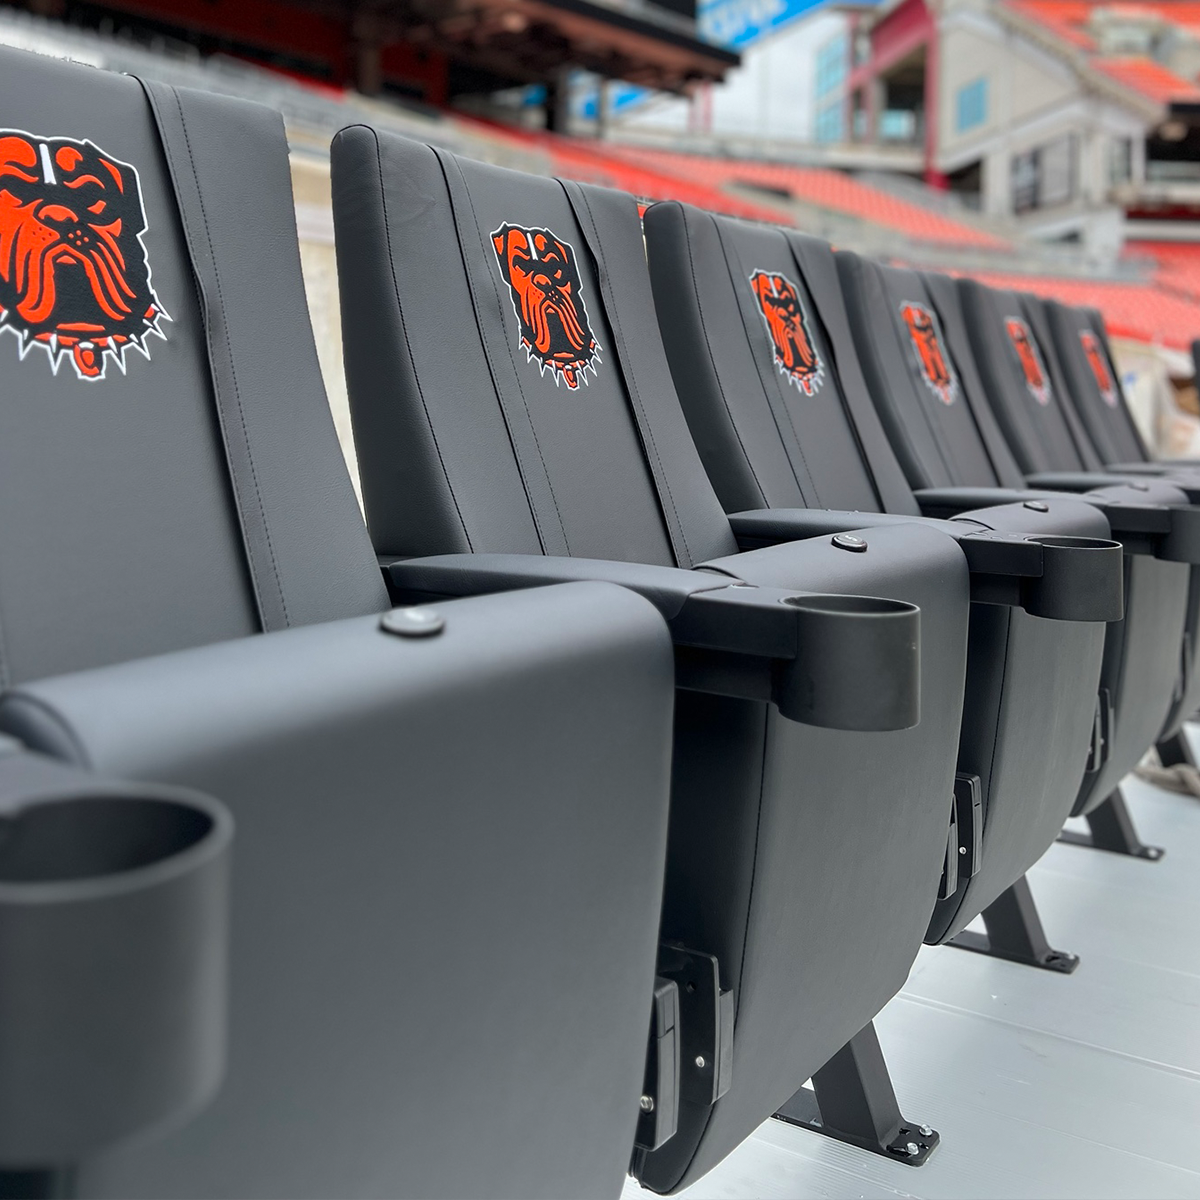 SuiteMax 3.5 VIP Seats with Baltimore Orioles Cooperstown Secondary Logo